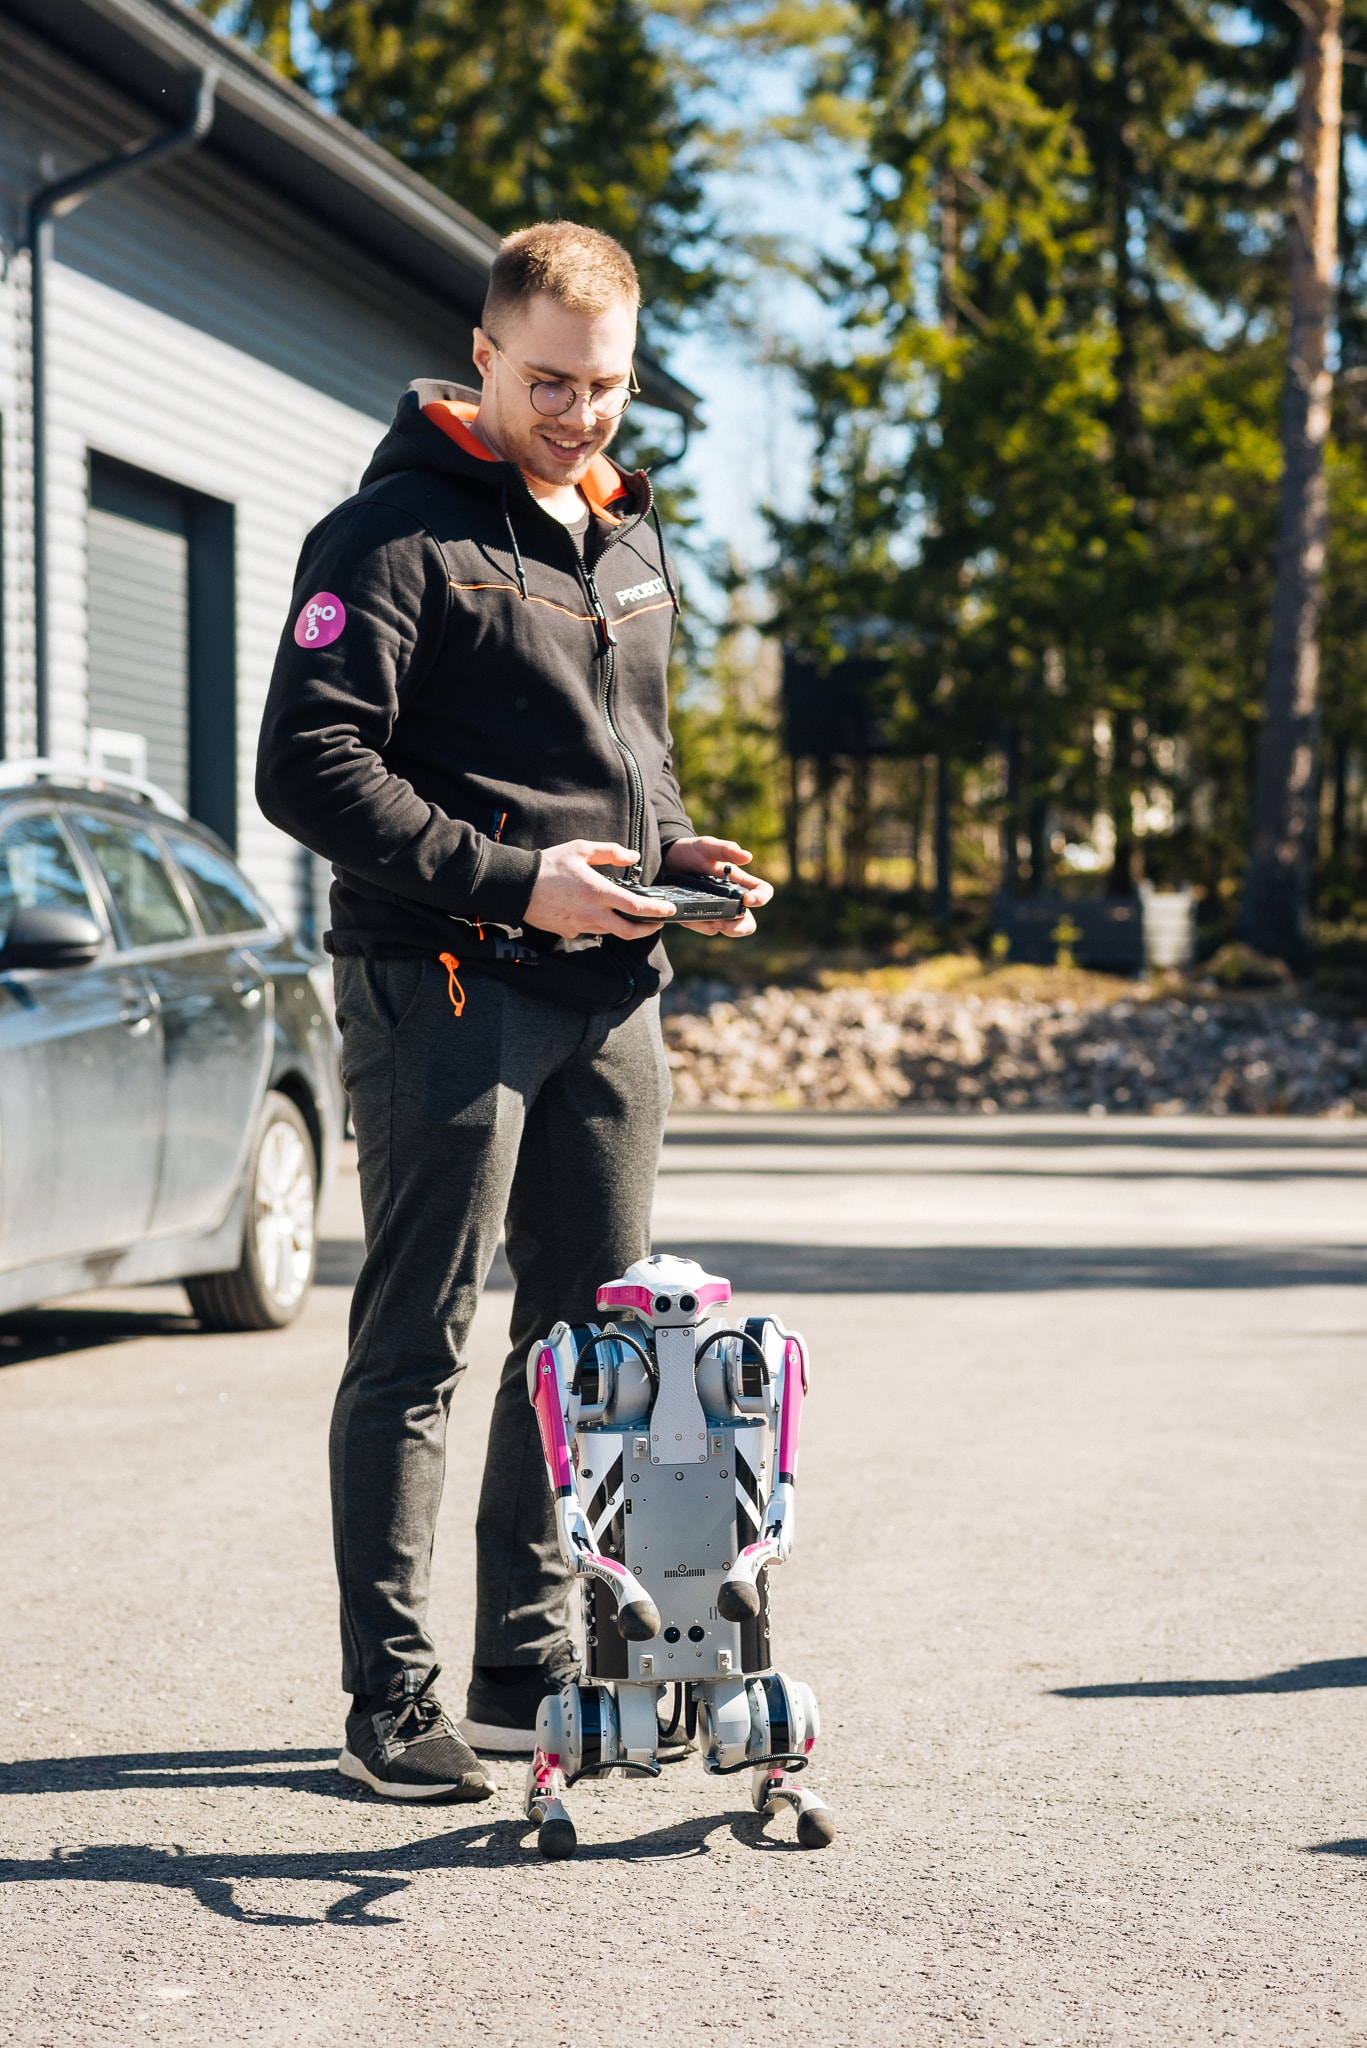 A man is standing outside with a robot dog, holding a controller in his hands.